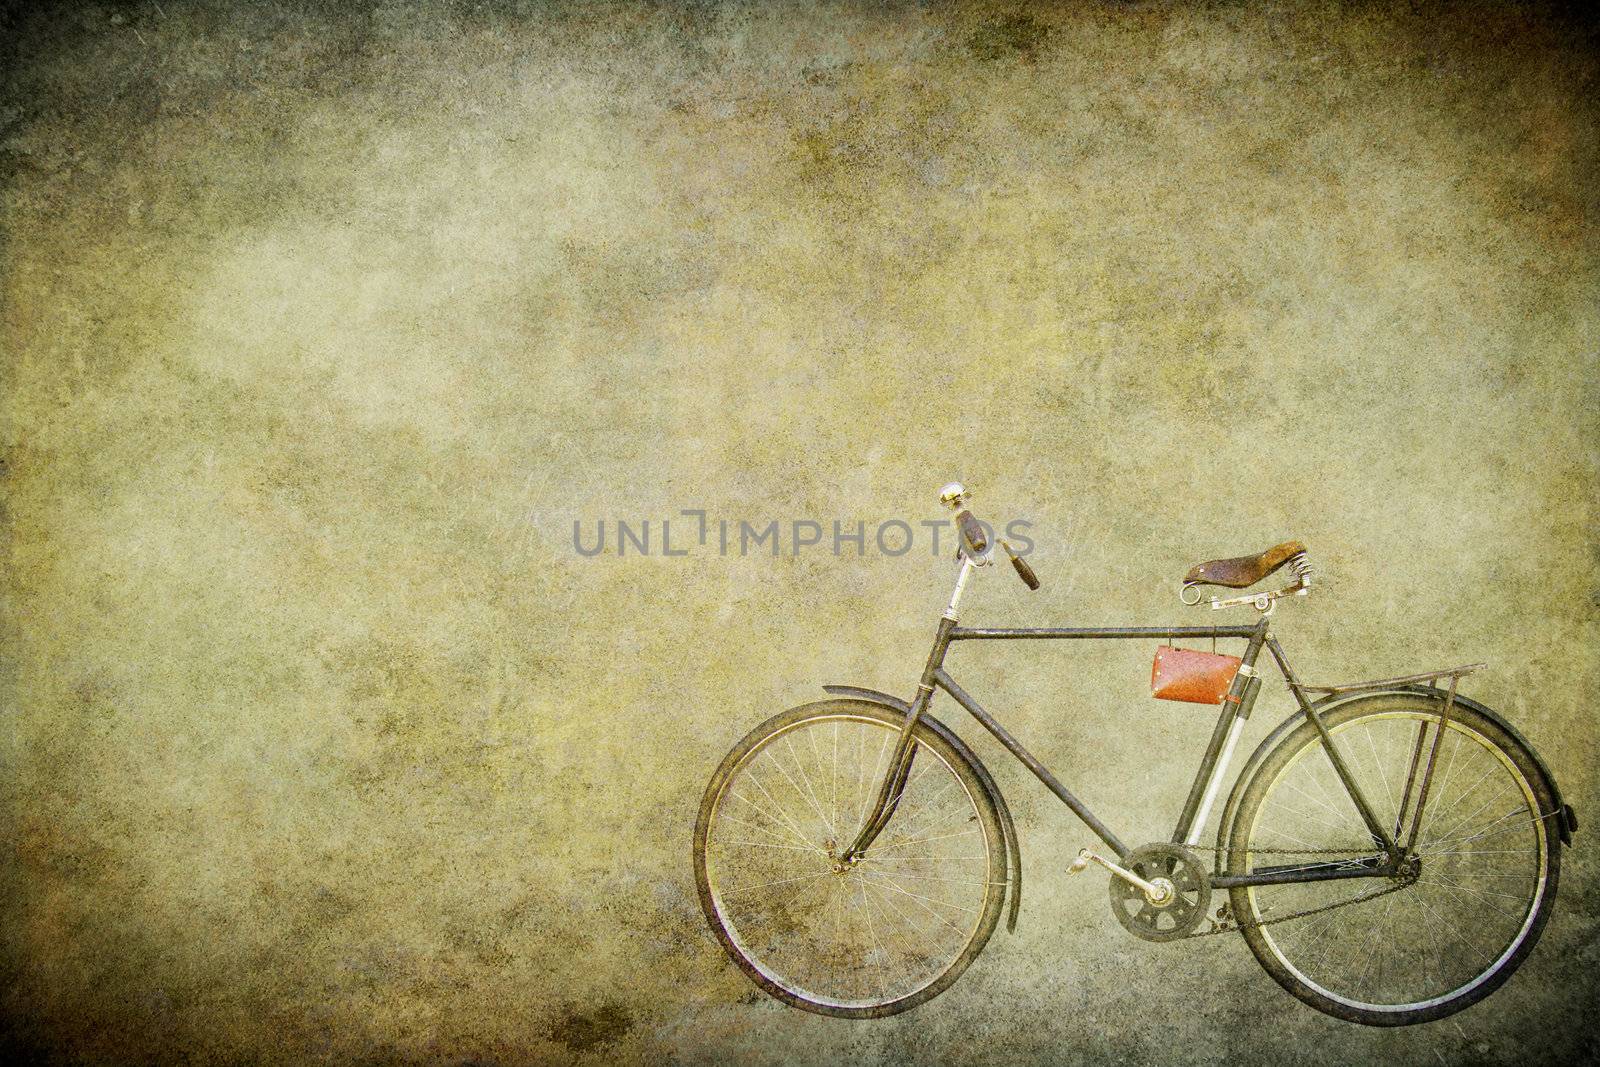 The old bicycle on the old brown paper